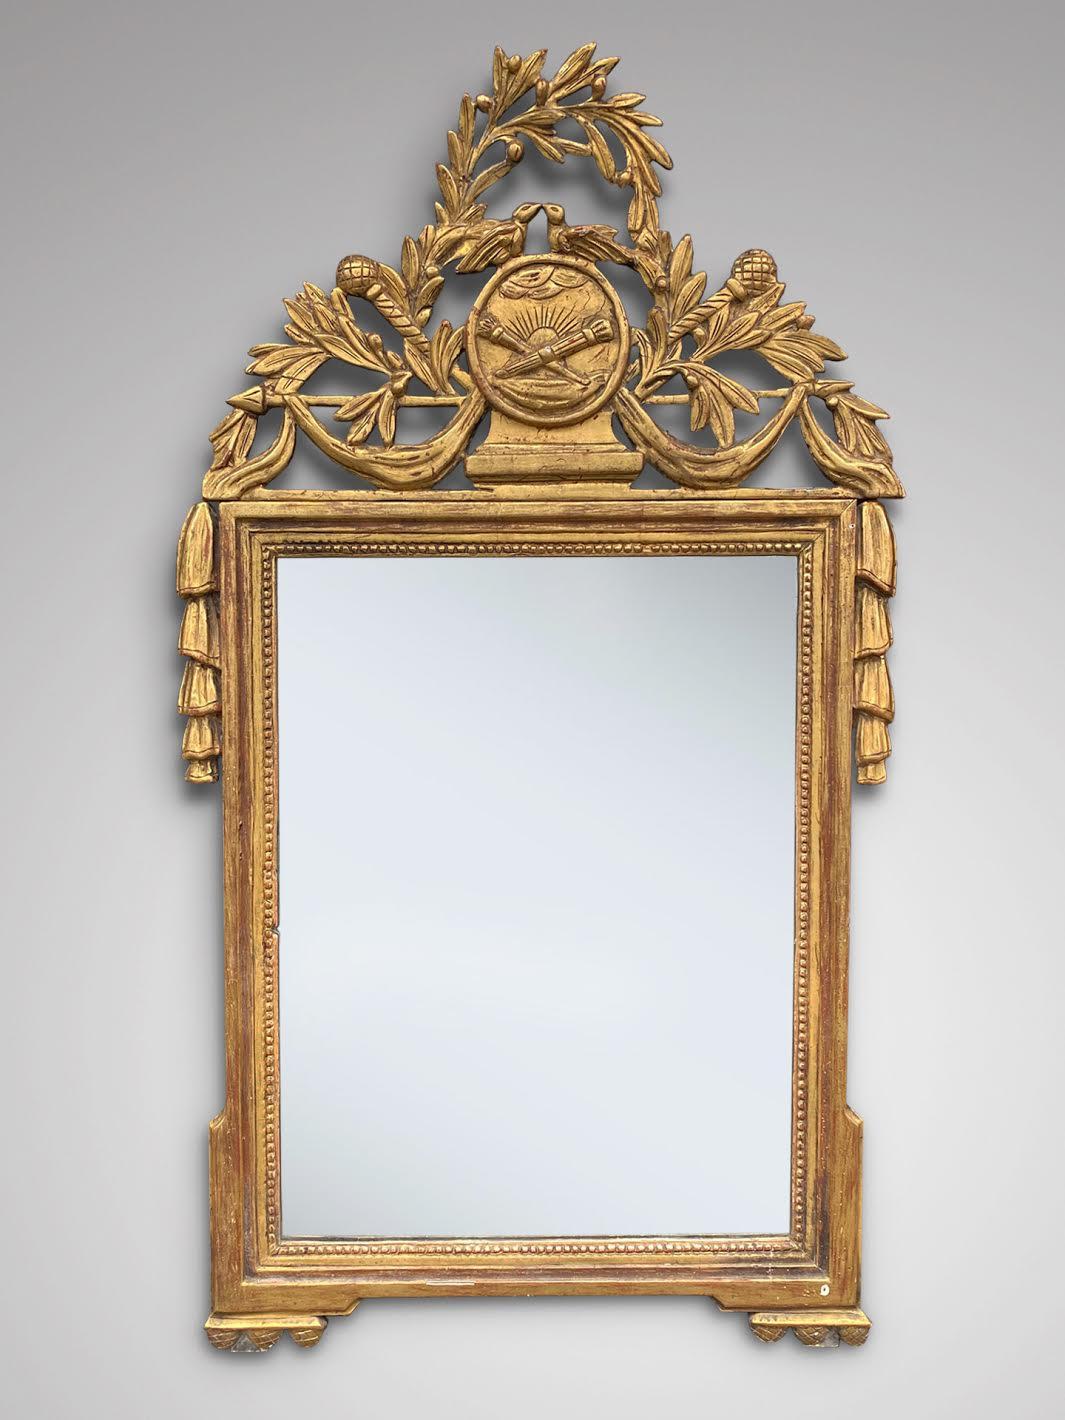 A very fine late 18th century French gilt wood framed pier wall Mirror of rectangular form, the top paired with birds & foliate sprays, the upper side corners with draping, original gilding and mercury plate mirror. Original back. France circa